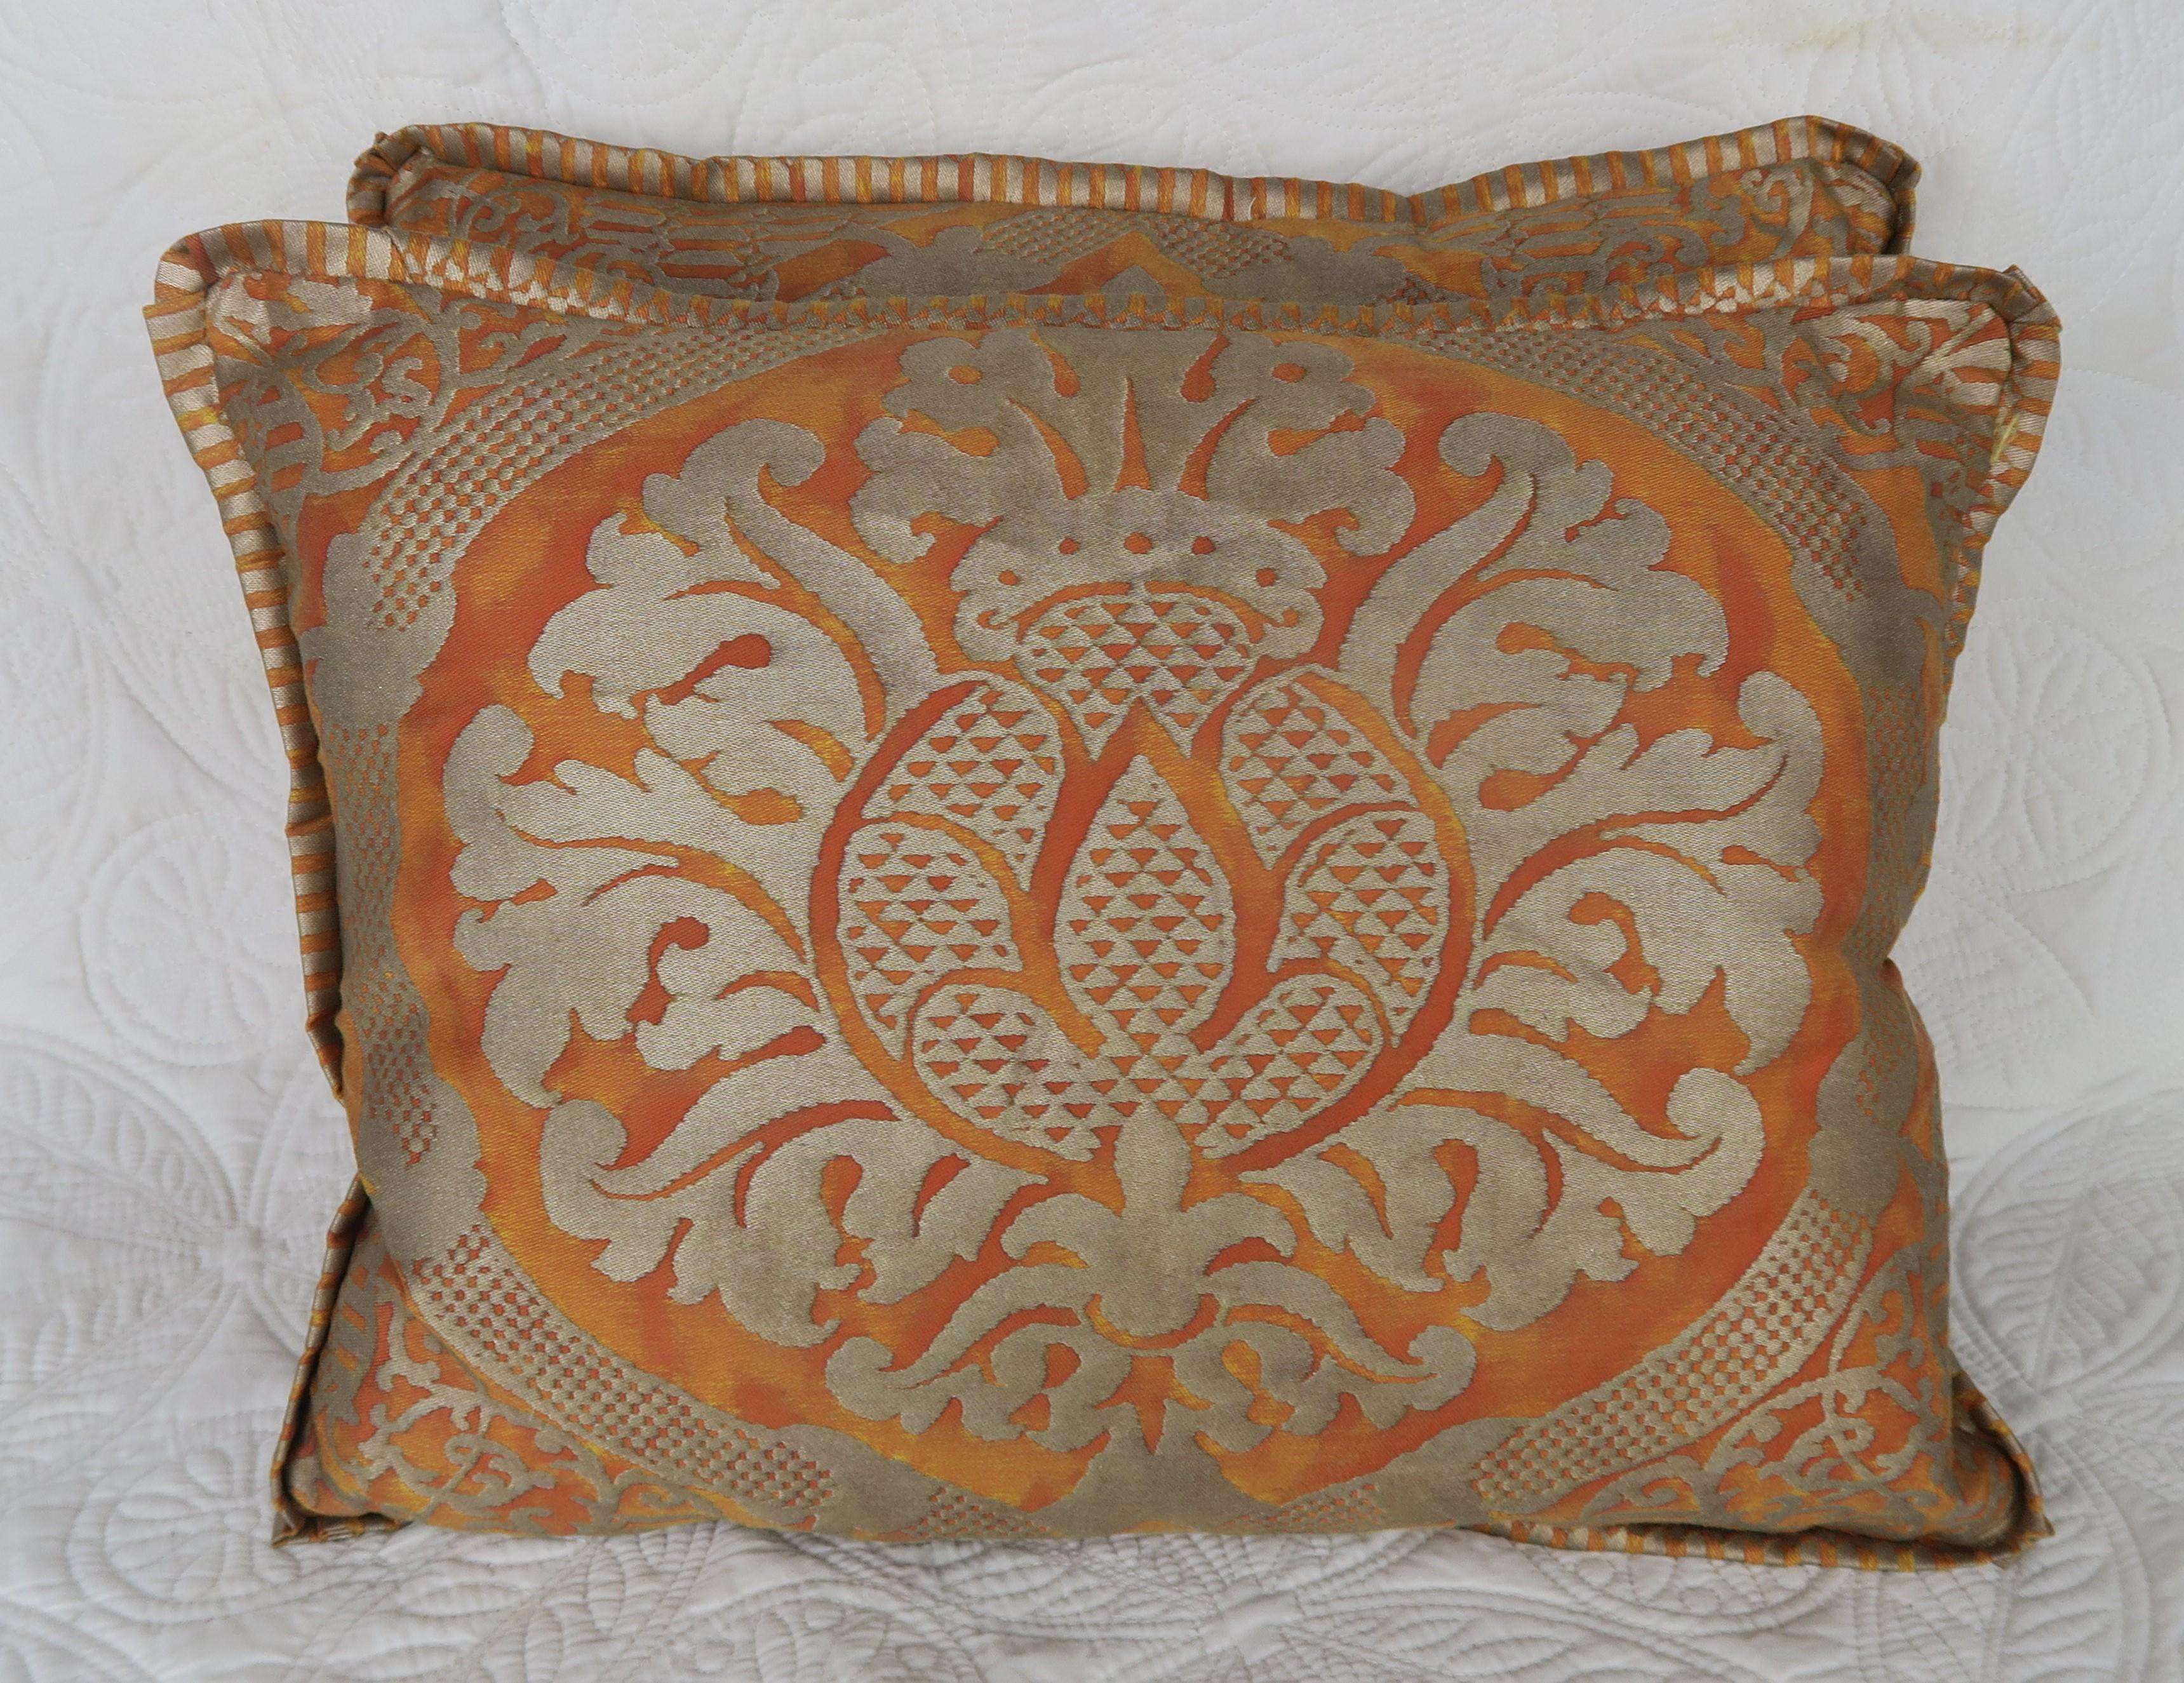 Pair of burnt orange and silvery gold Fortuny pillows with sunkist colored silk backs and flat welt detail. Down inserts, zipper closures.
     